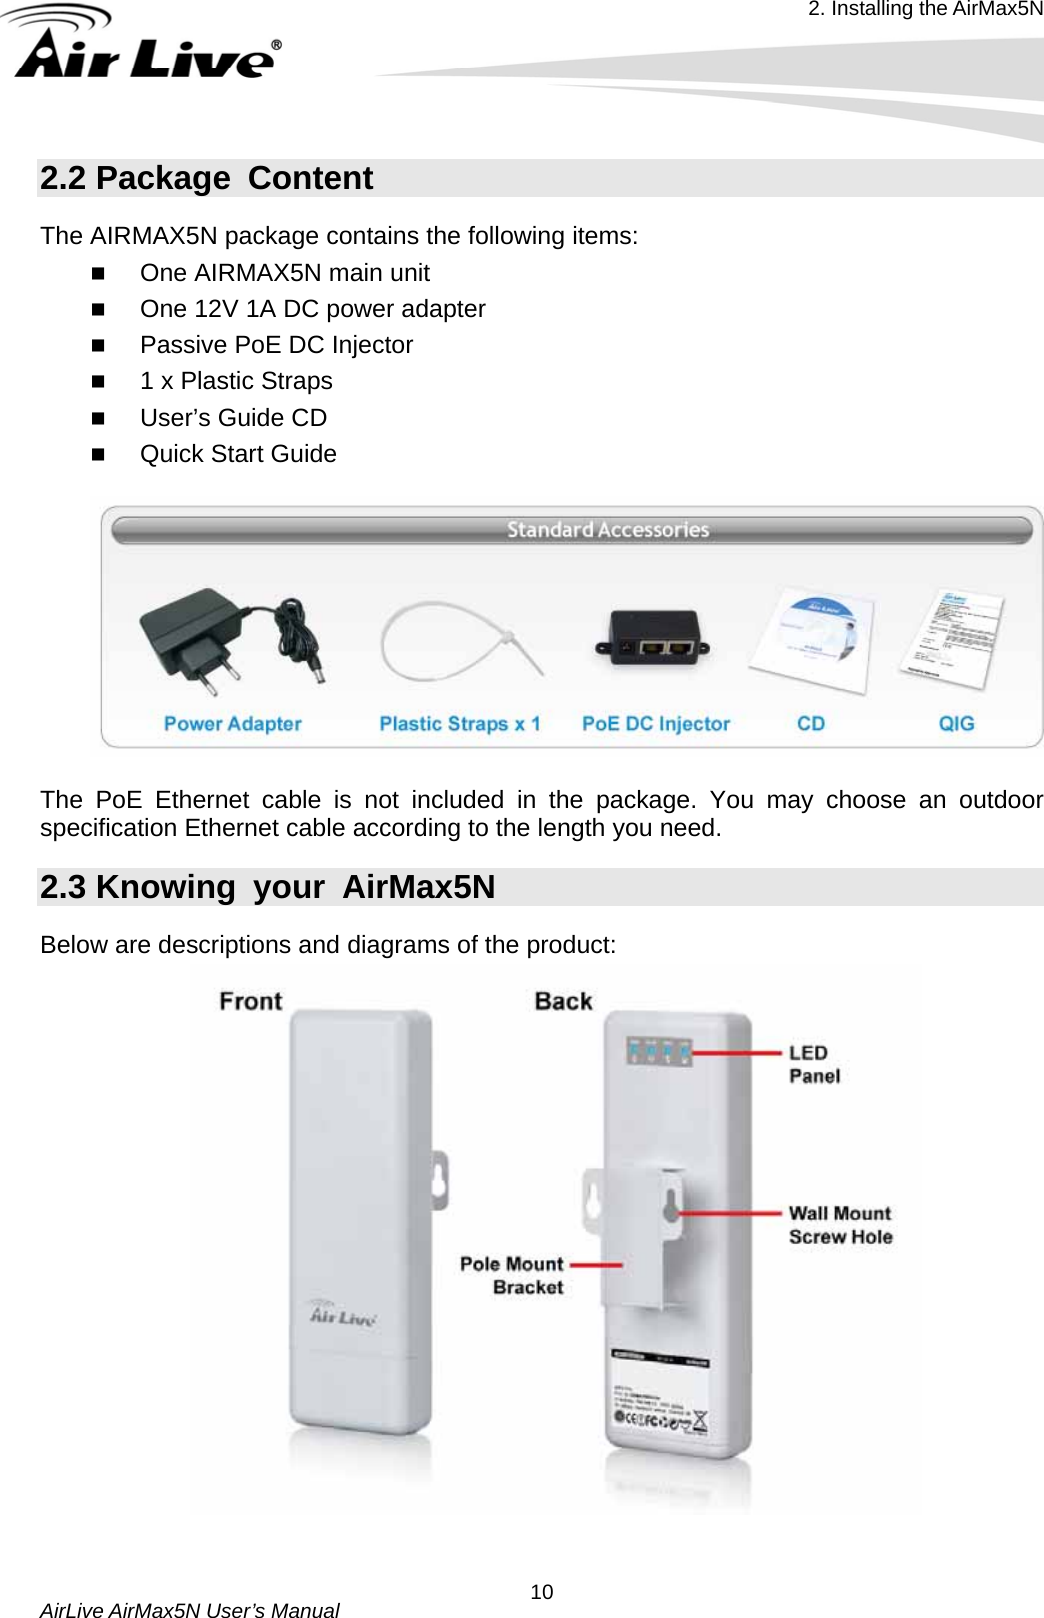 2. Installing the AirMax5N  AirLive AirMax5N User’s Manual  102.2 Package  Content The AIRMAX5N package contains the following items:    One AIRMAX5N main unit  One 12V 1A DC power adapter  Passive PoE DC Injector  1 x Plastic Straps  User’s Guide CD  Quick Start Guide    The PoE Ethernet cable is not included in the package. You may choose an outdoor specification Ethernet cable according to the length you need. 2.3 Knowing  your  AirMax5N Below are descriptions and diagrams of the product:   